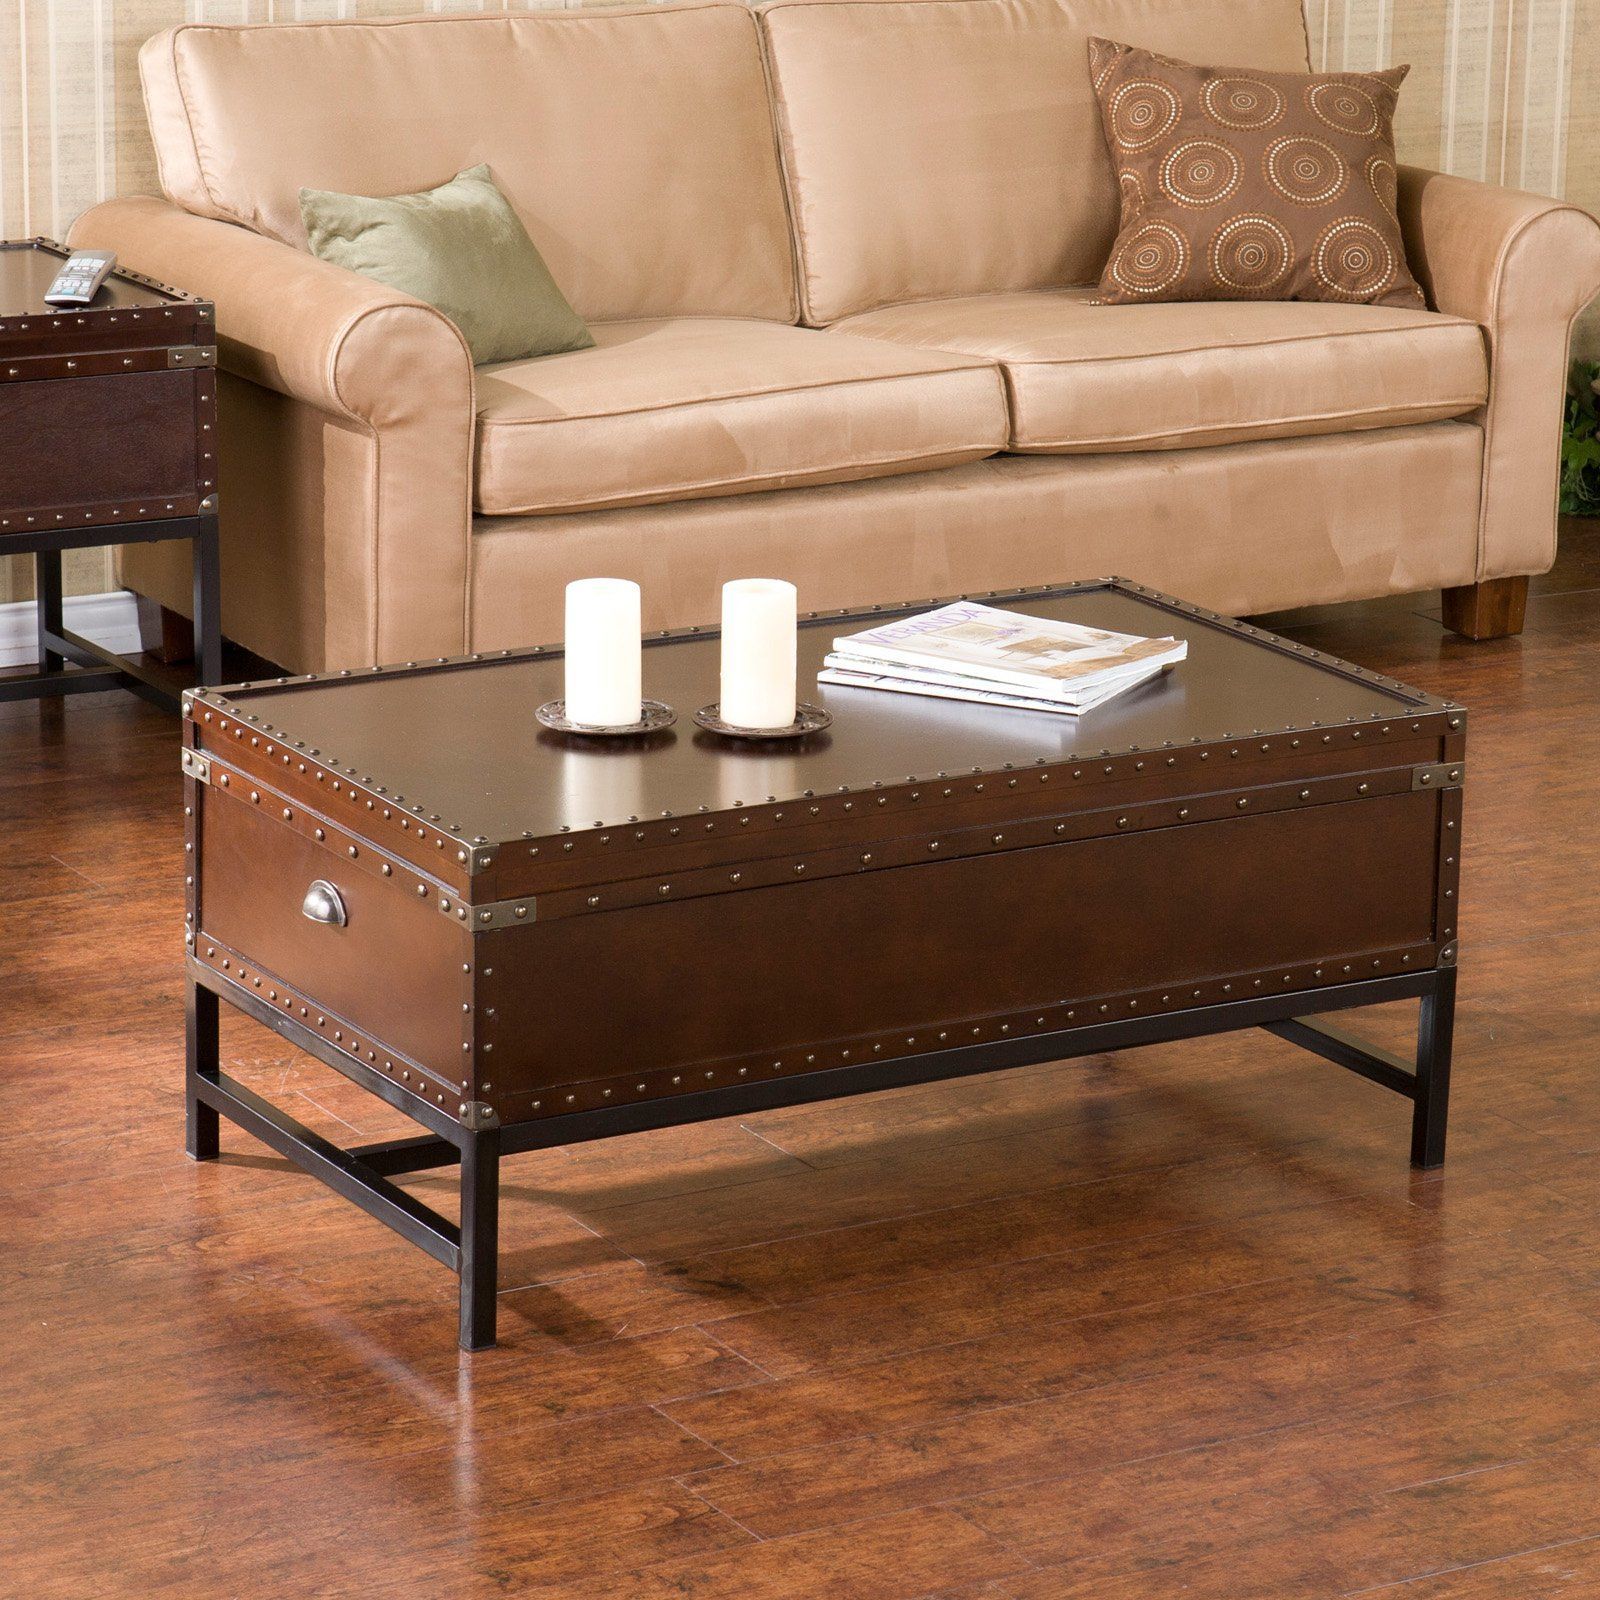 Southern Enterprises Voyager Espresso Trunk Coffee Table | Coffee Table In Southern Enterprises Larksmill Coffee Tables (Gallery 15 of 20)